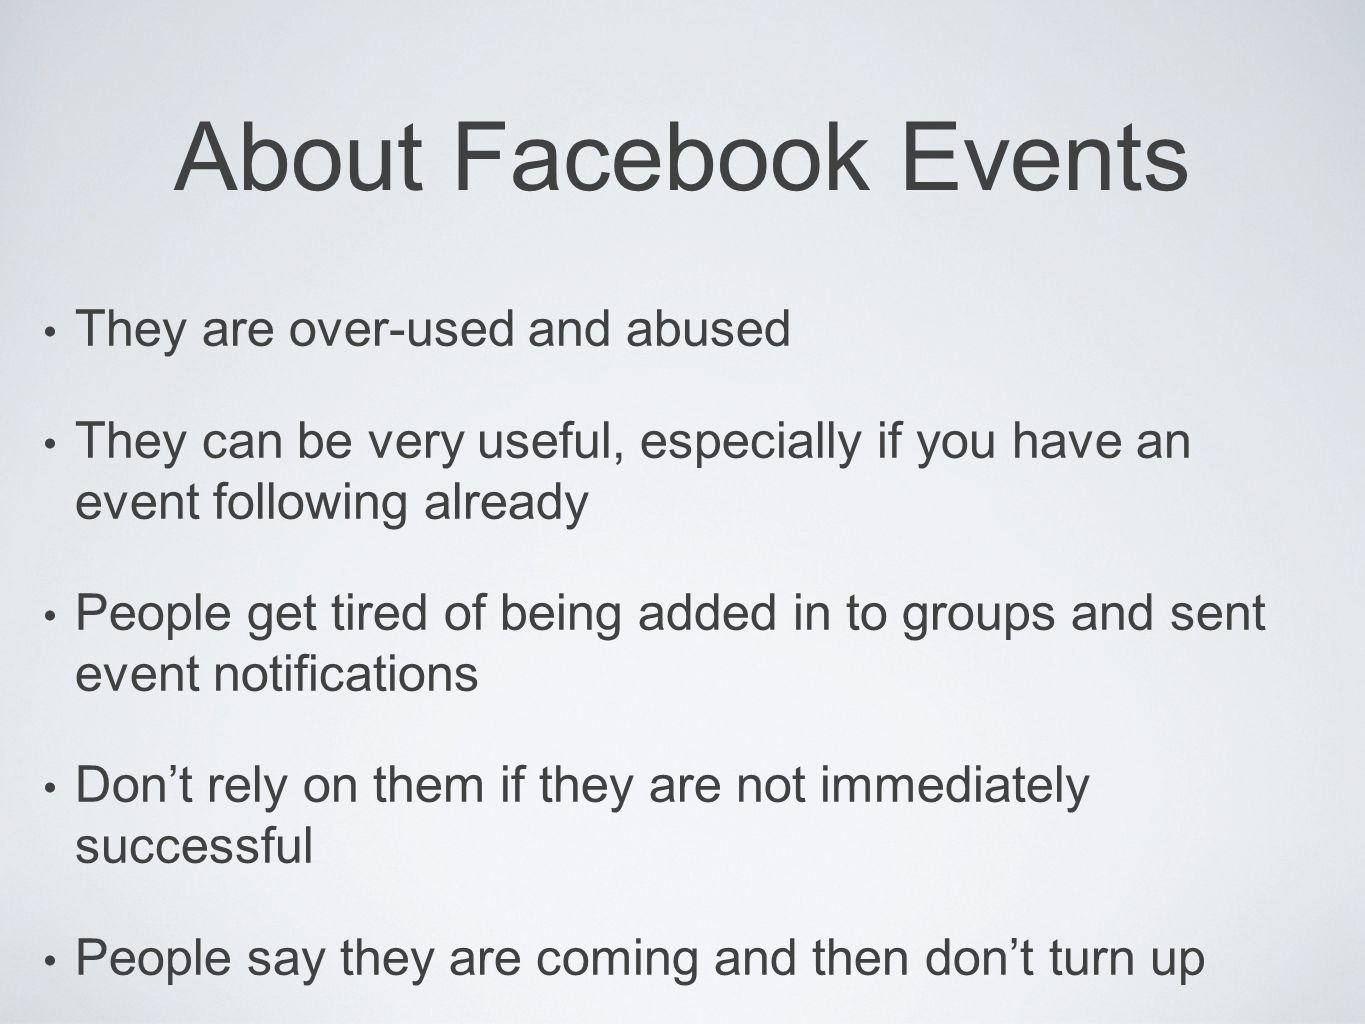 About Facebook Events They are over-used and abused They can be very useful, especially if you have an event following already People get tired of being added in to groups and sent event notifications Don’t rely on them if they are not immediately successful People say they are coming and then don’t turn up